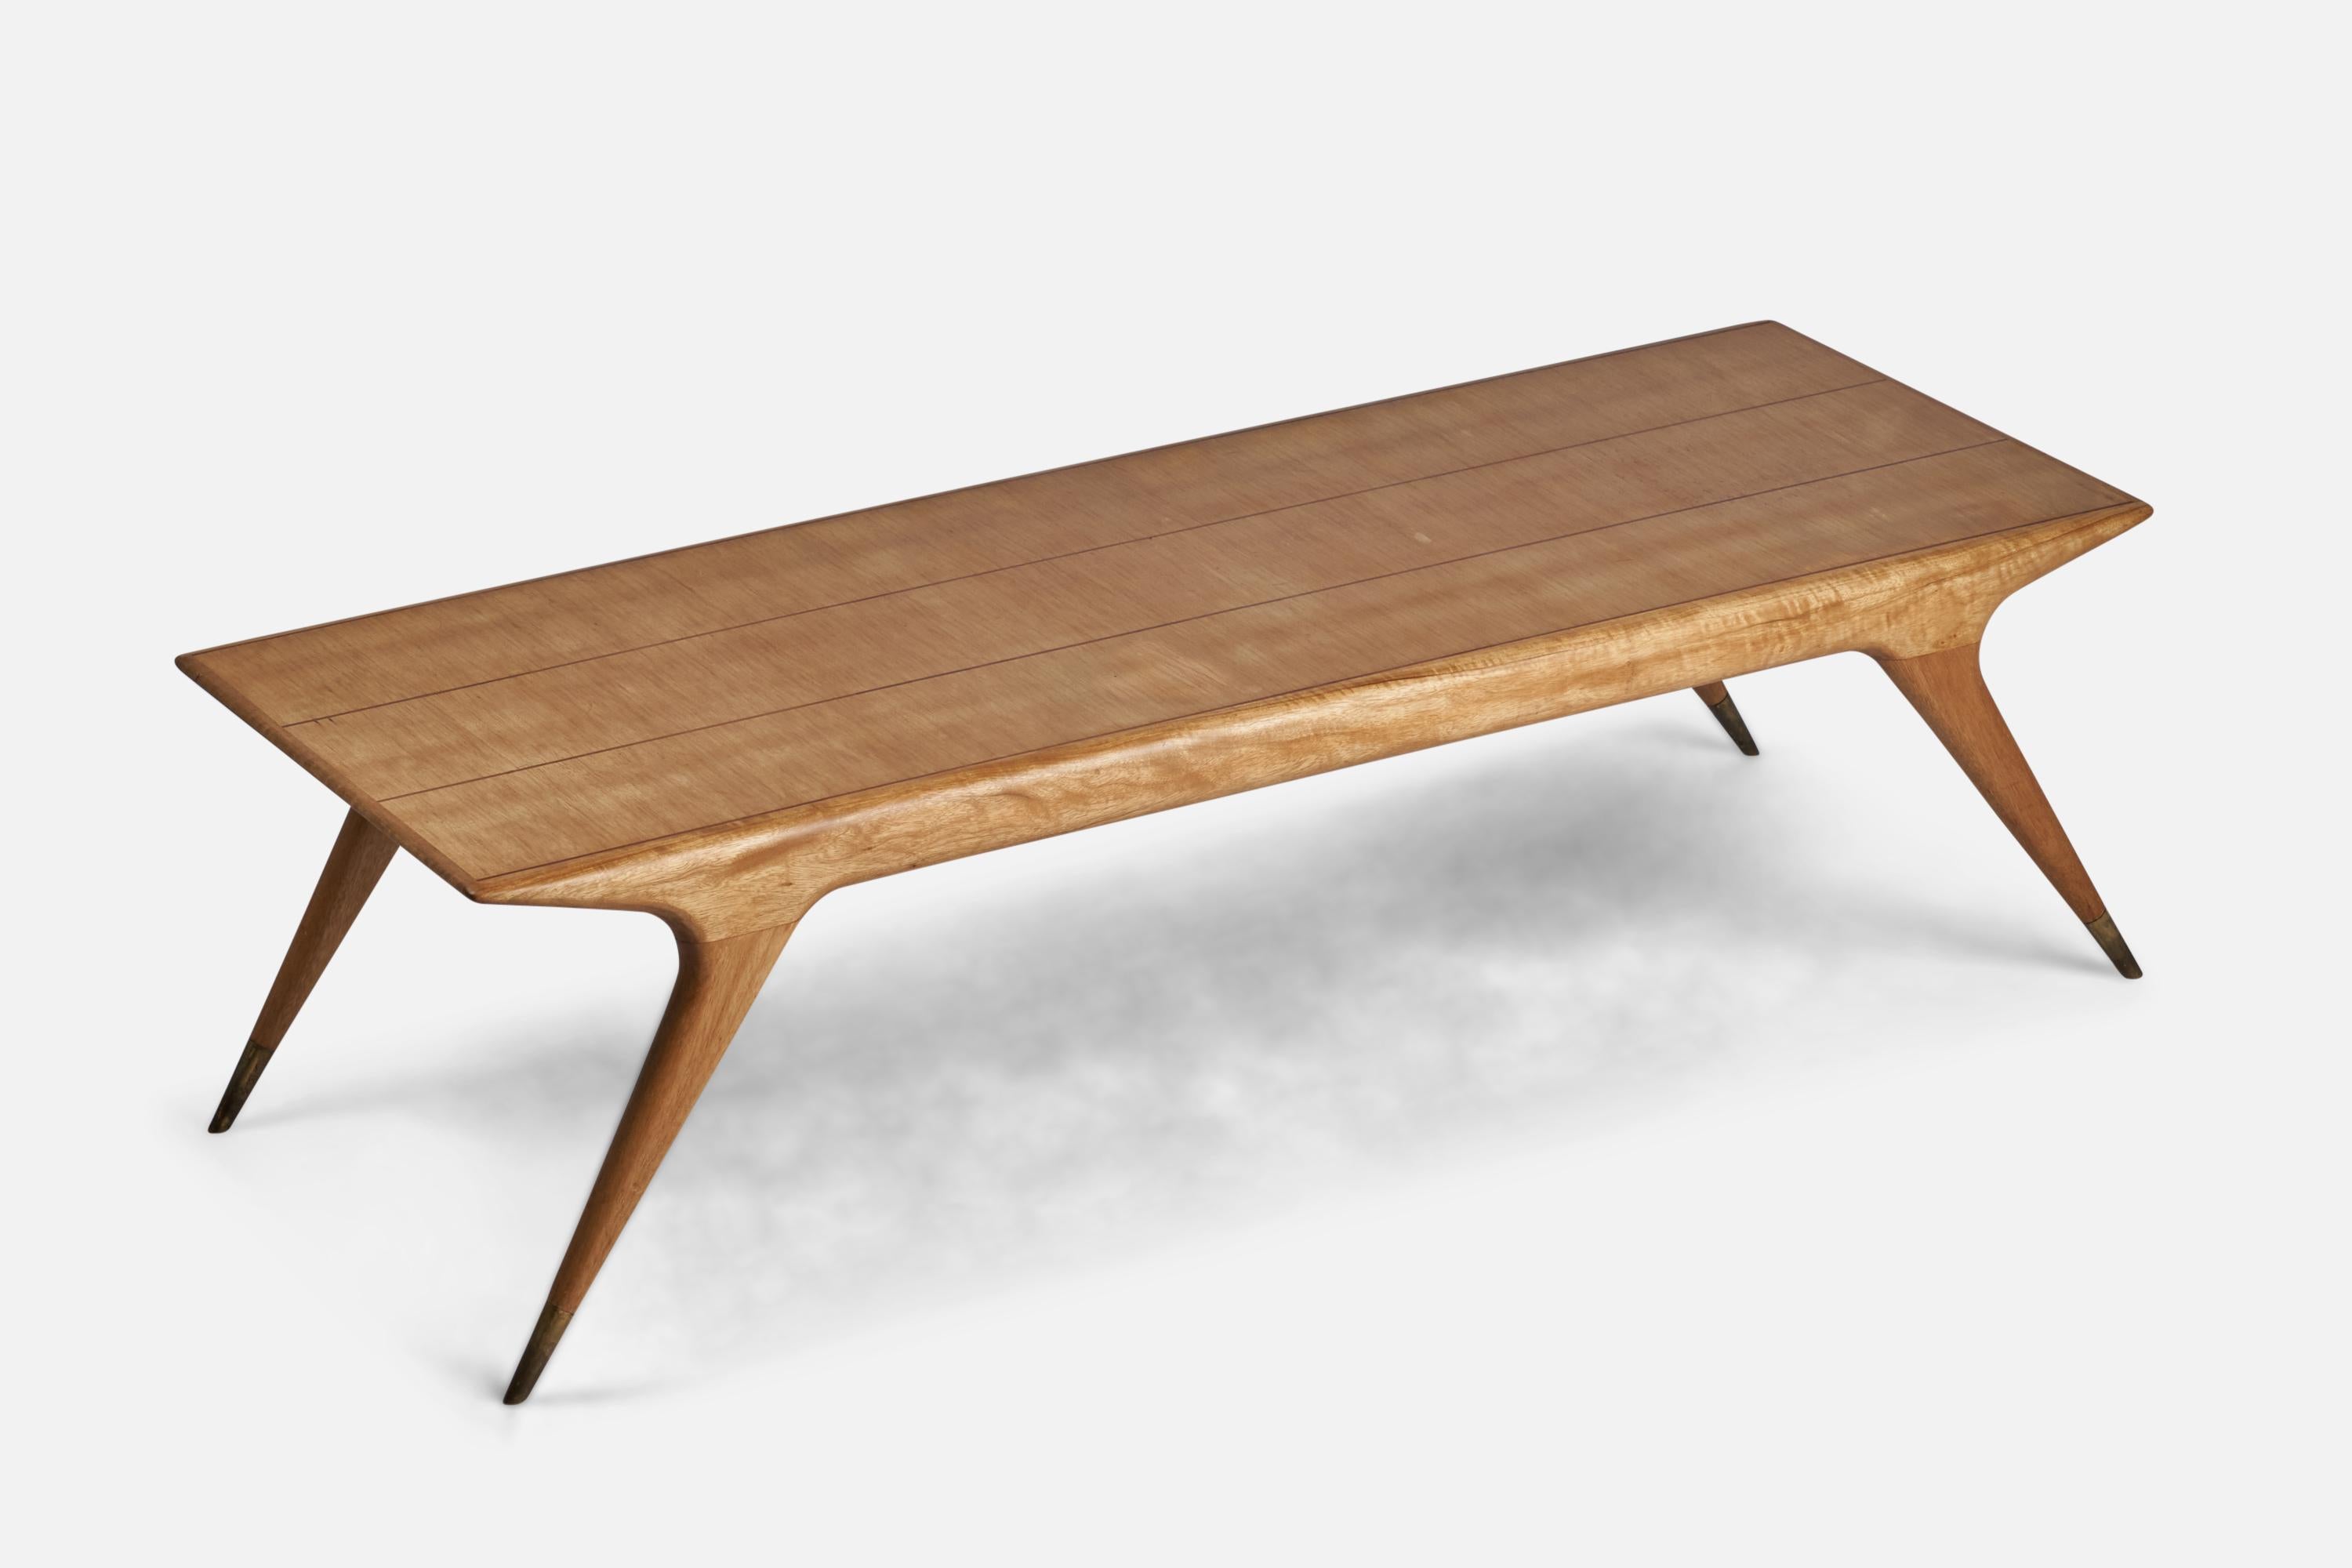 A beech and brass coffee table with inlays designed and produced in Italy c. 1950s.